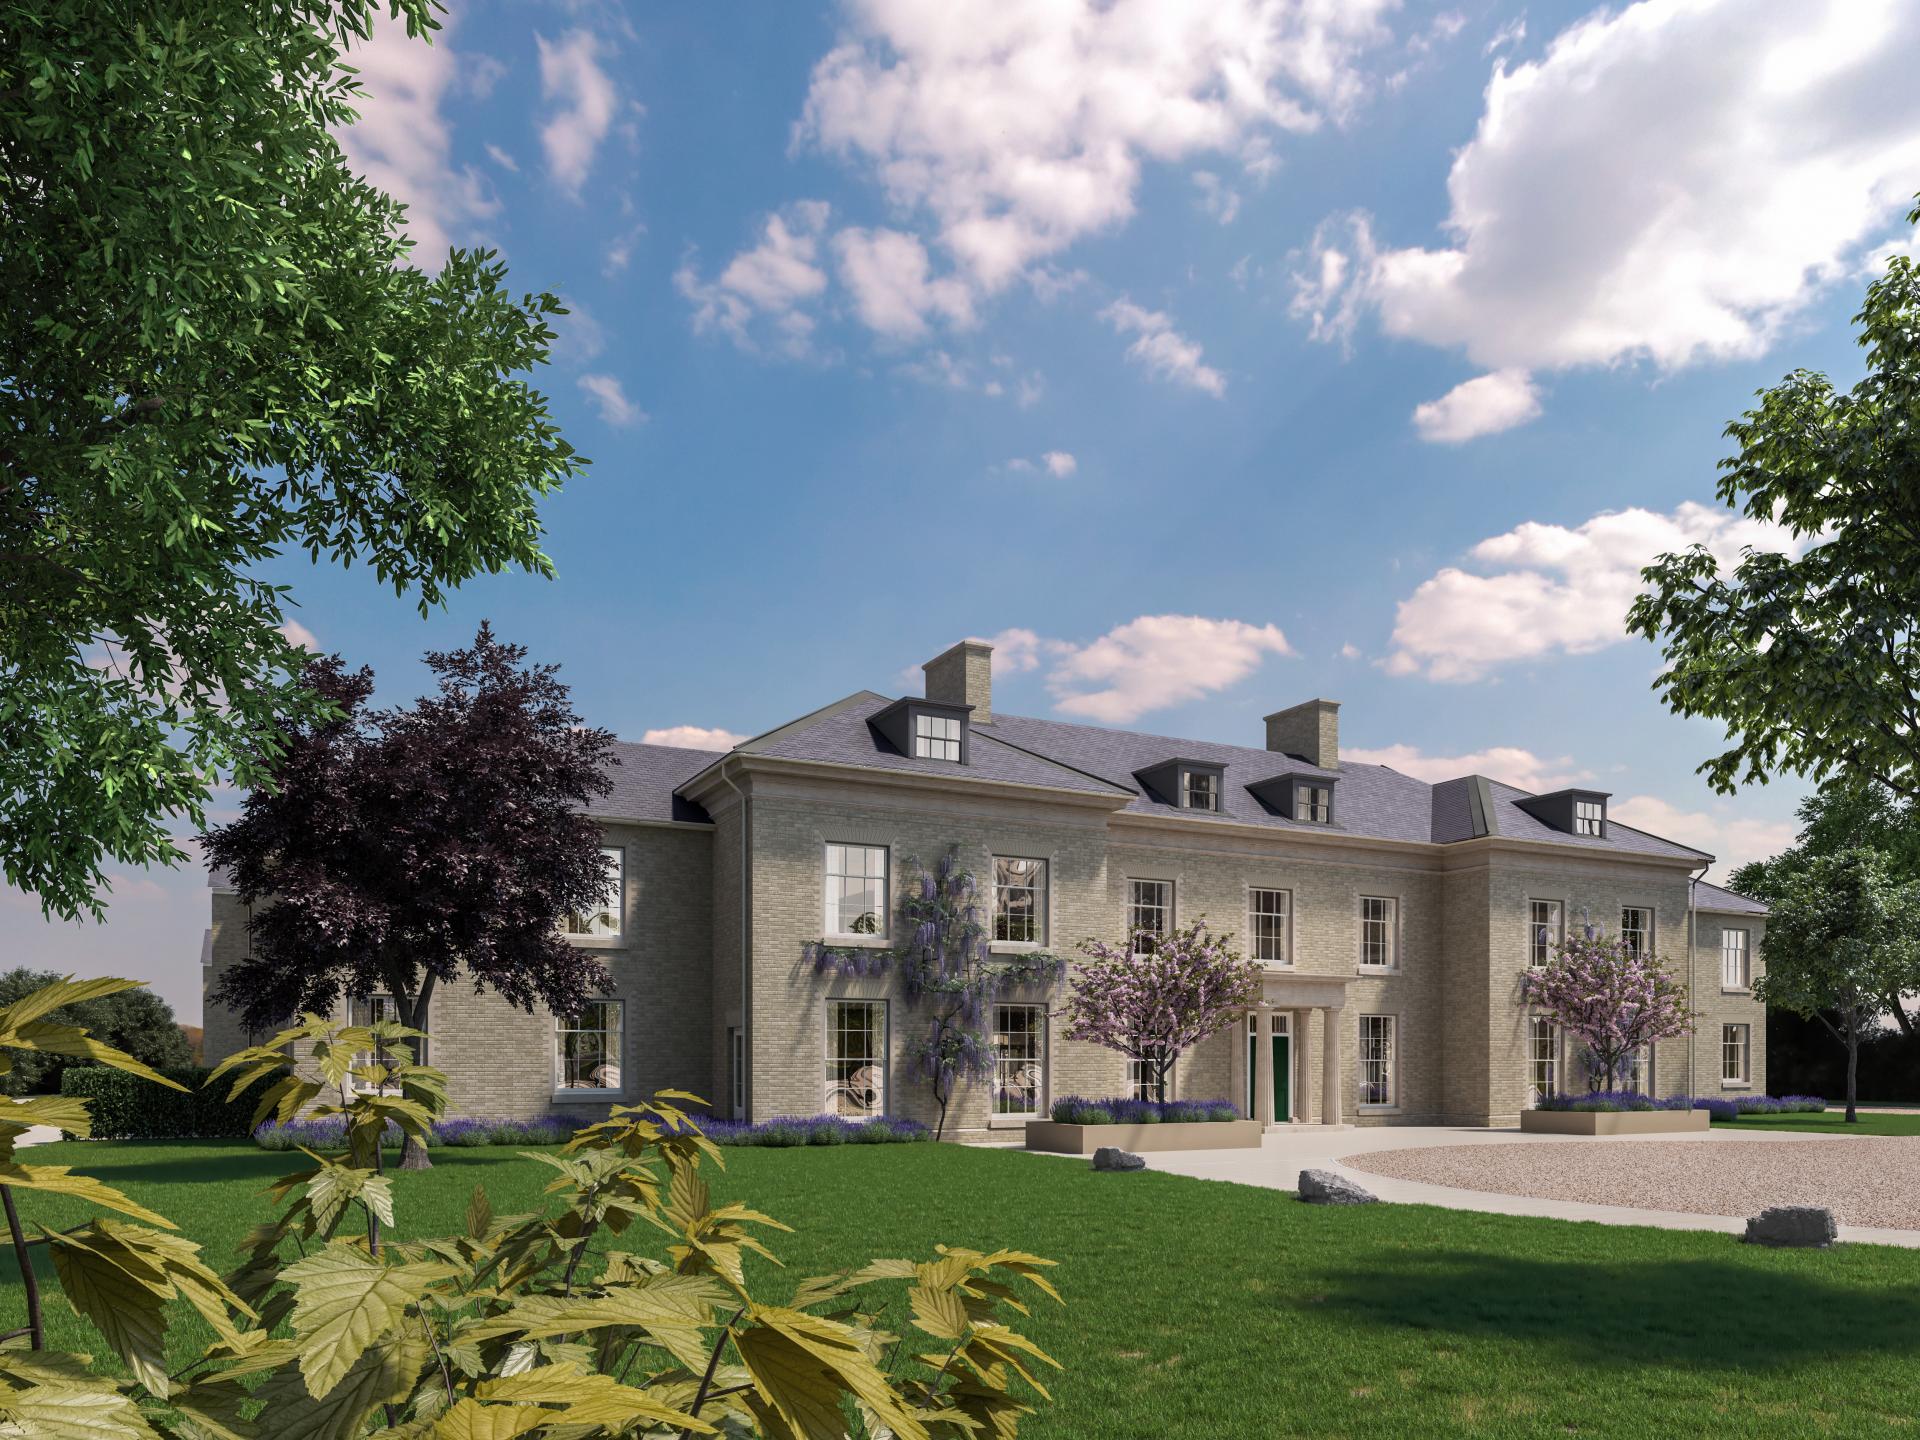 Hotel redevelopment for care home